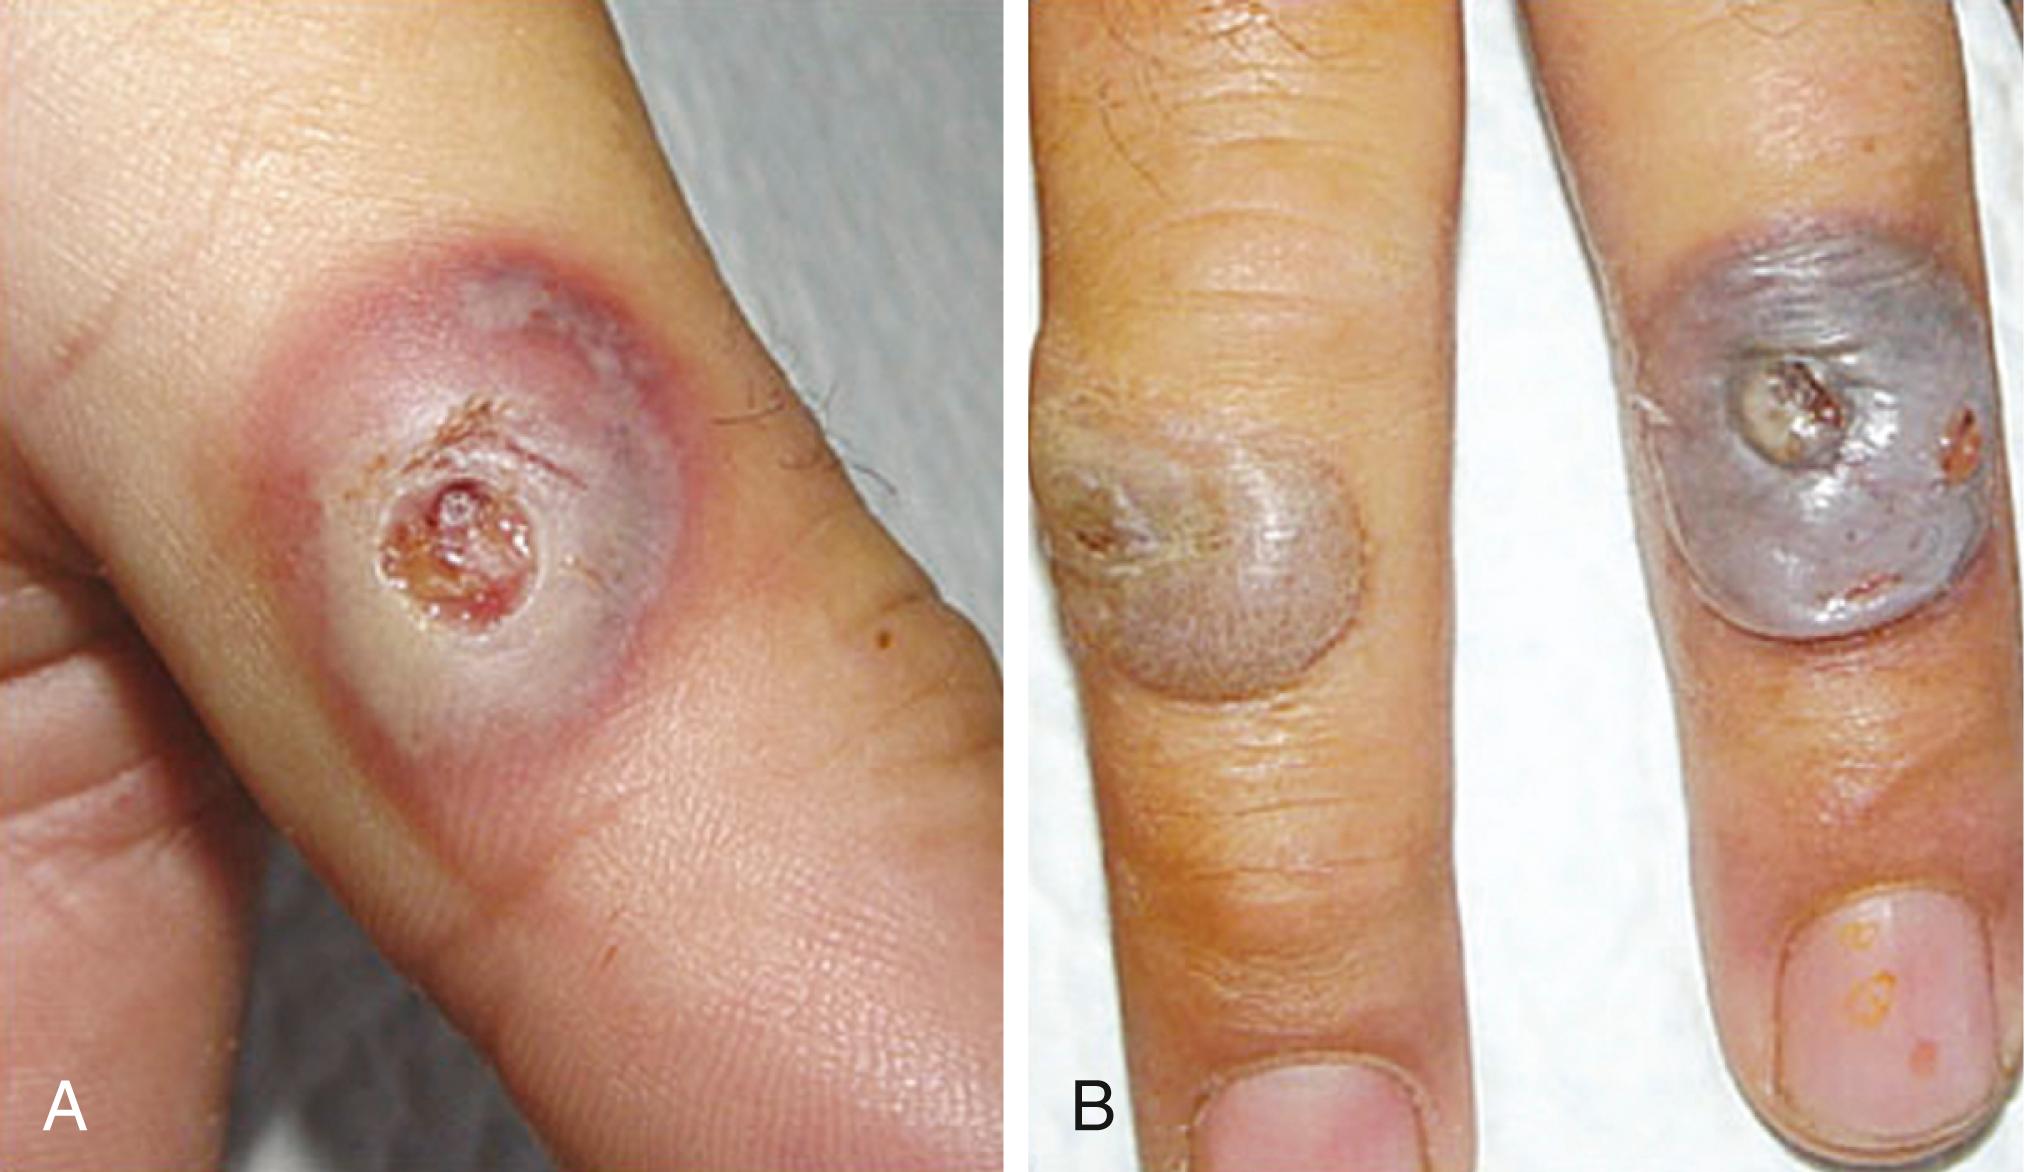 Fig. 3.4, Orf can infect one or two fingers simultaneously. A, The lesion has an umbilicated red center, a white middle, and a peripheral violaceous halo. B, The lesion may be bulbous and affect multiple fingers.